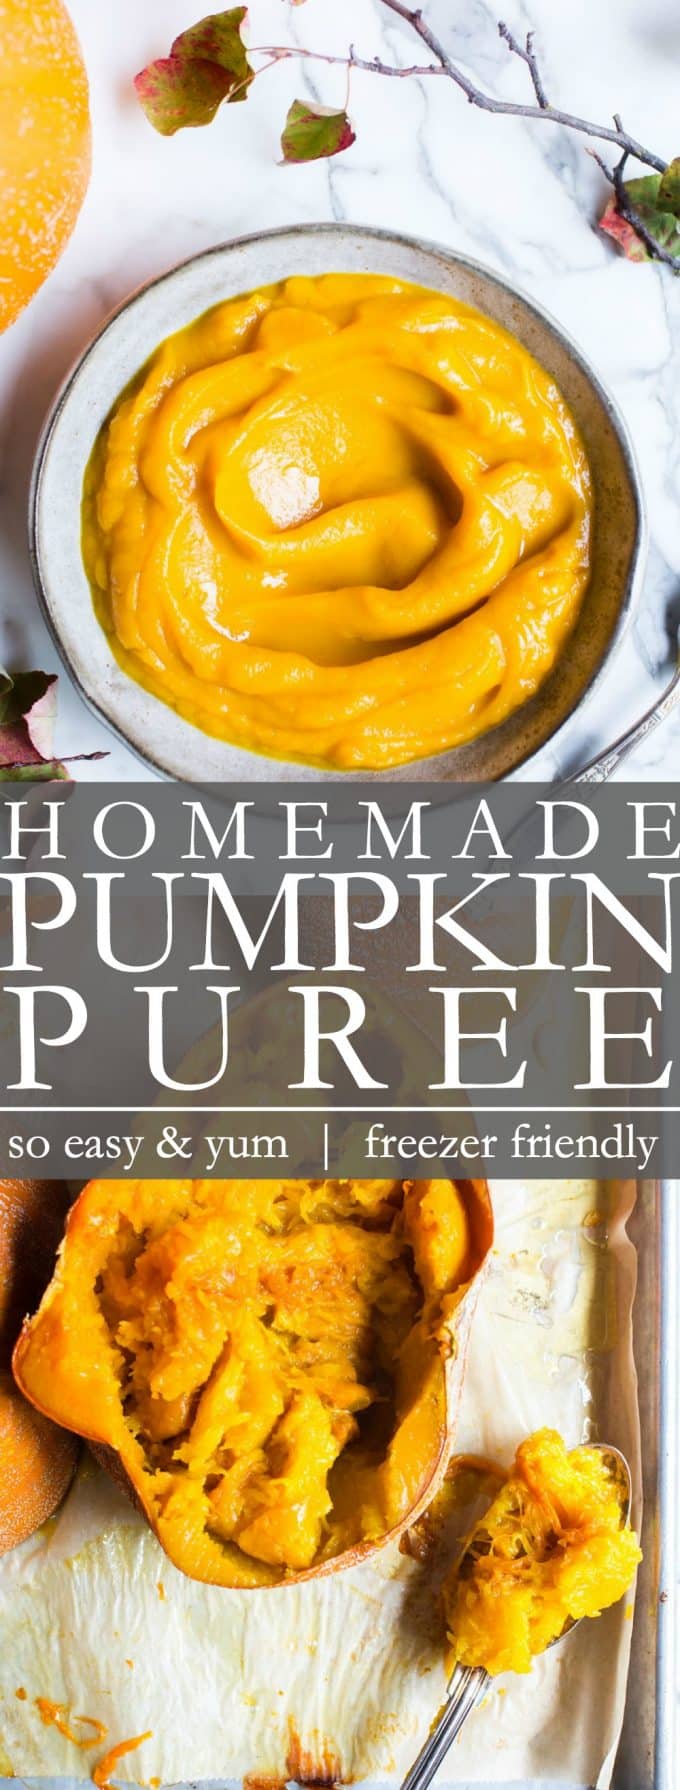 Pinterest Pin with pumpkin puree in a bowl and pumpkin flesh being scooped out. 